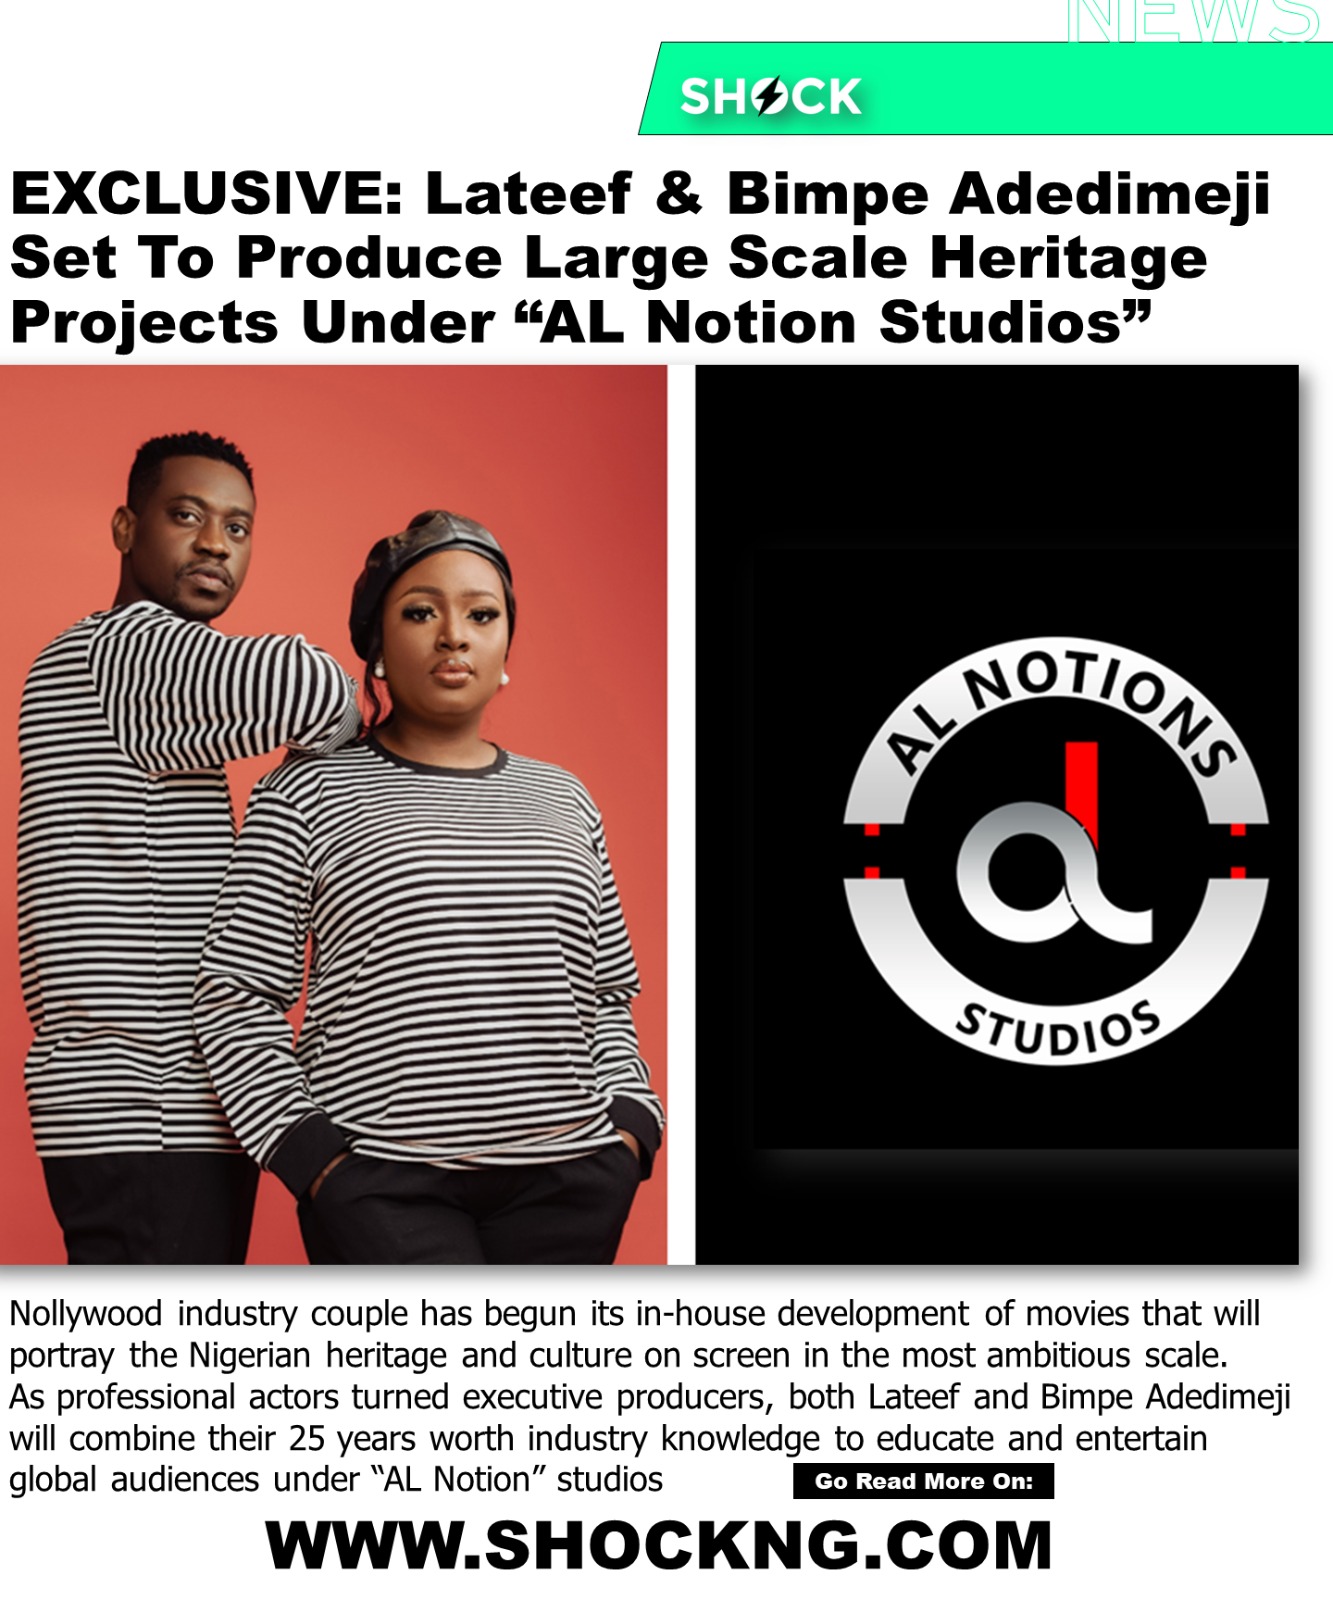 Lateef and Bimpe Adedimeji Set To Produce Large Scale Heritage Projects Under AL Notion Studios EXCLUSIVE - Lateef and Bimpe Adedimeji Set To Produce Large Scale Heritage Projects Under AL Notion Studios (EXCLUSIVE)